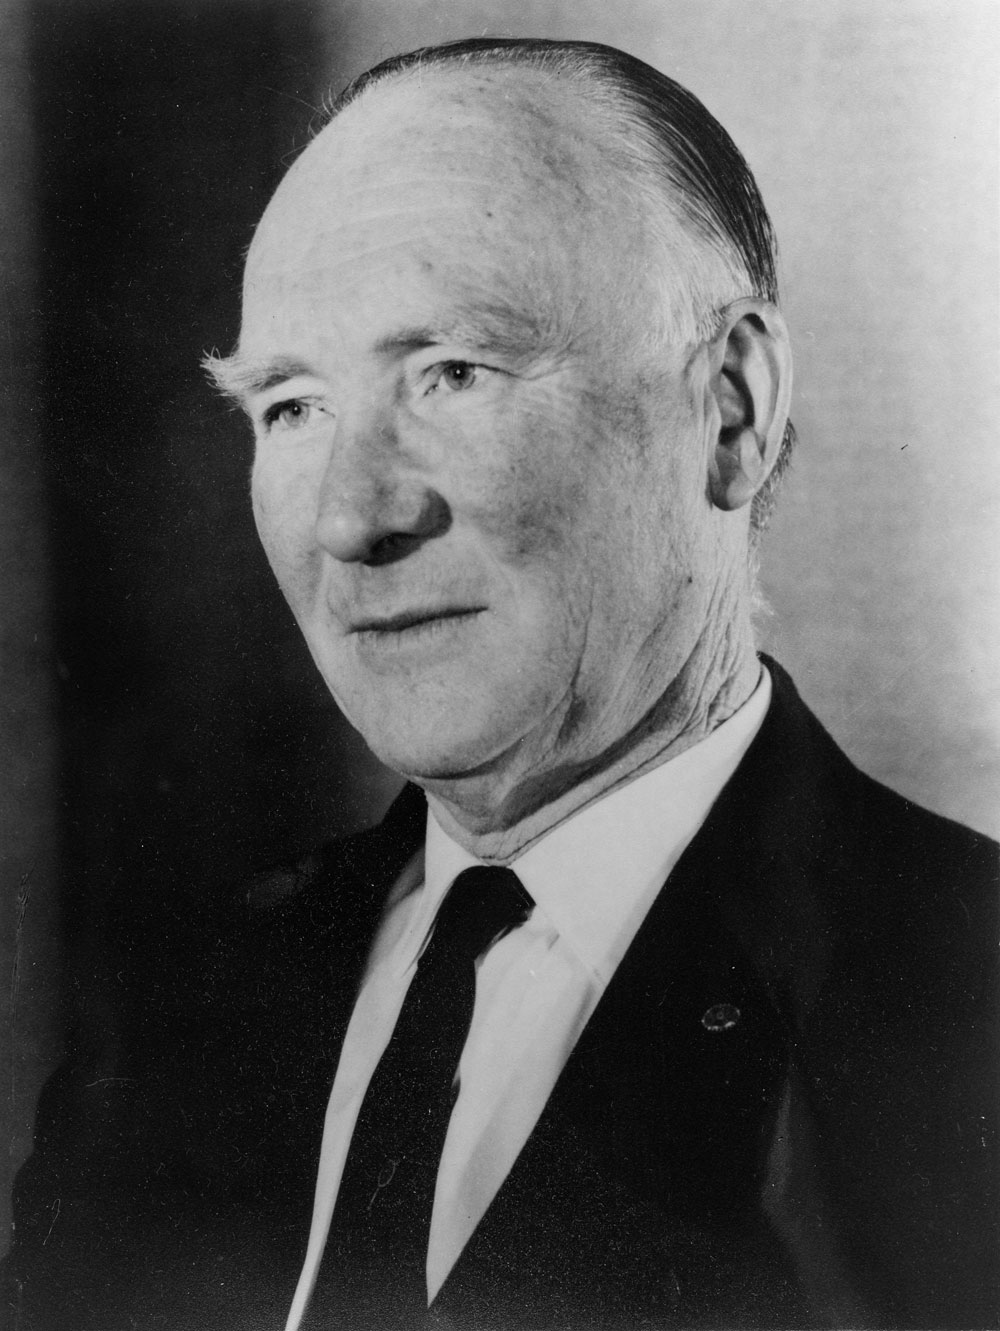 A photograph of Thomas Leech a dark suit and tie.  